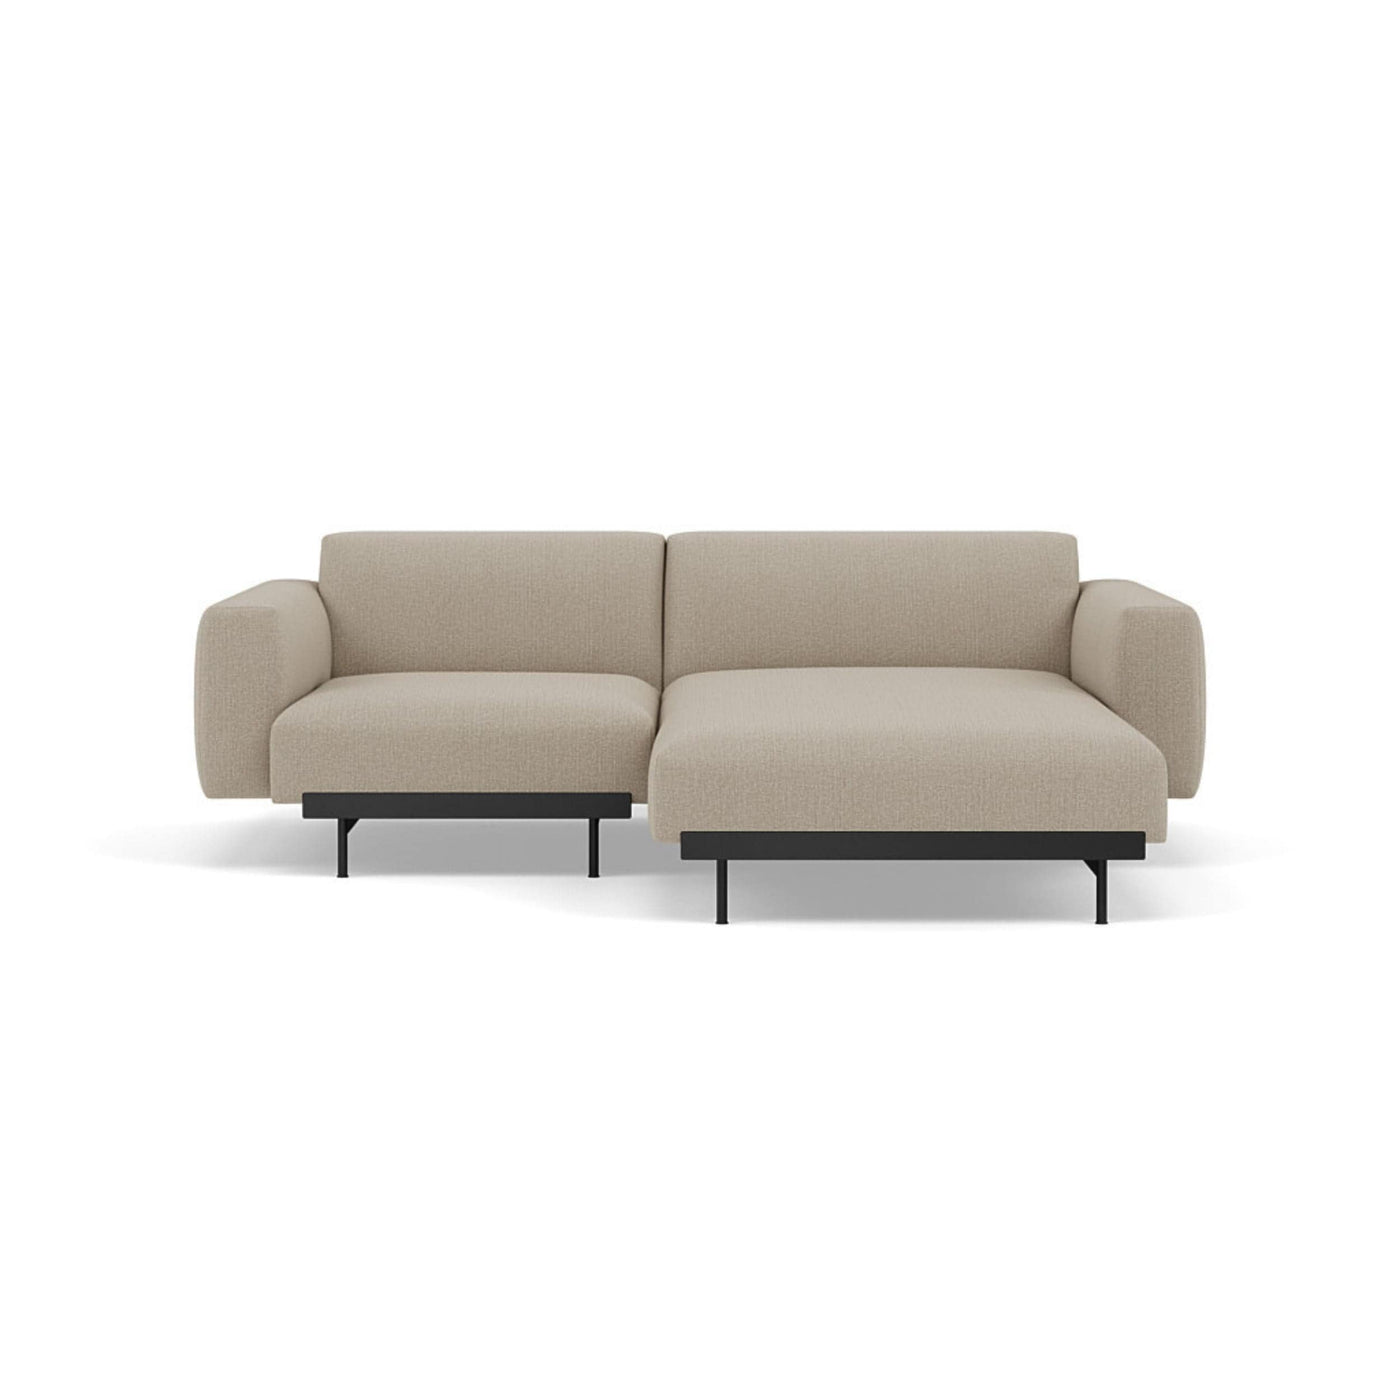 Muuto In Situ Modular 2 Seater Sofa, configuration 4. Made to order from someday designs #colour_clay-10